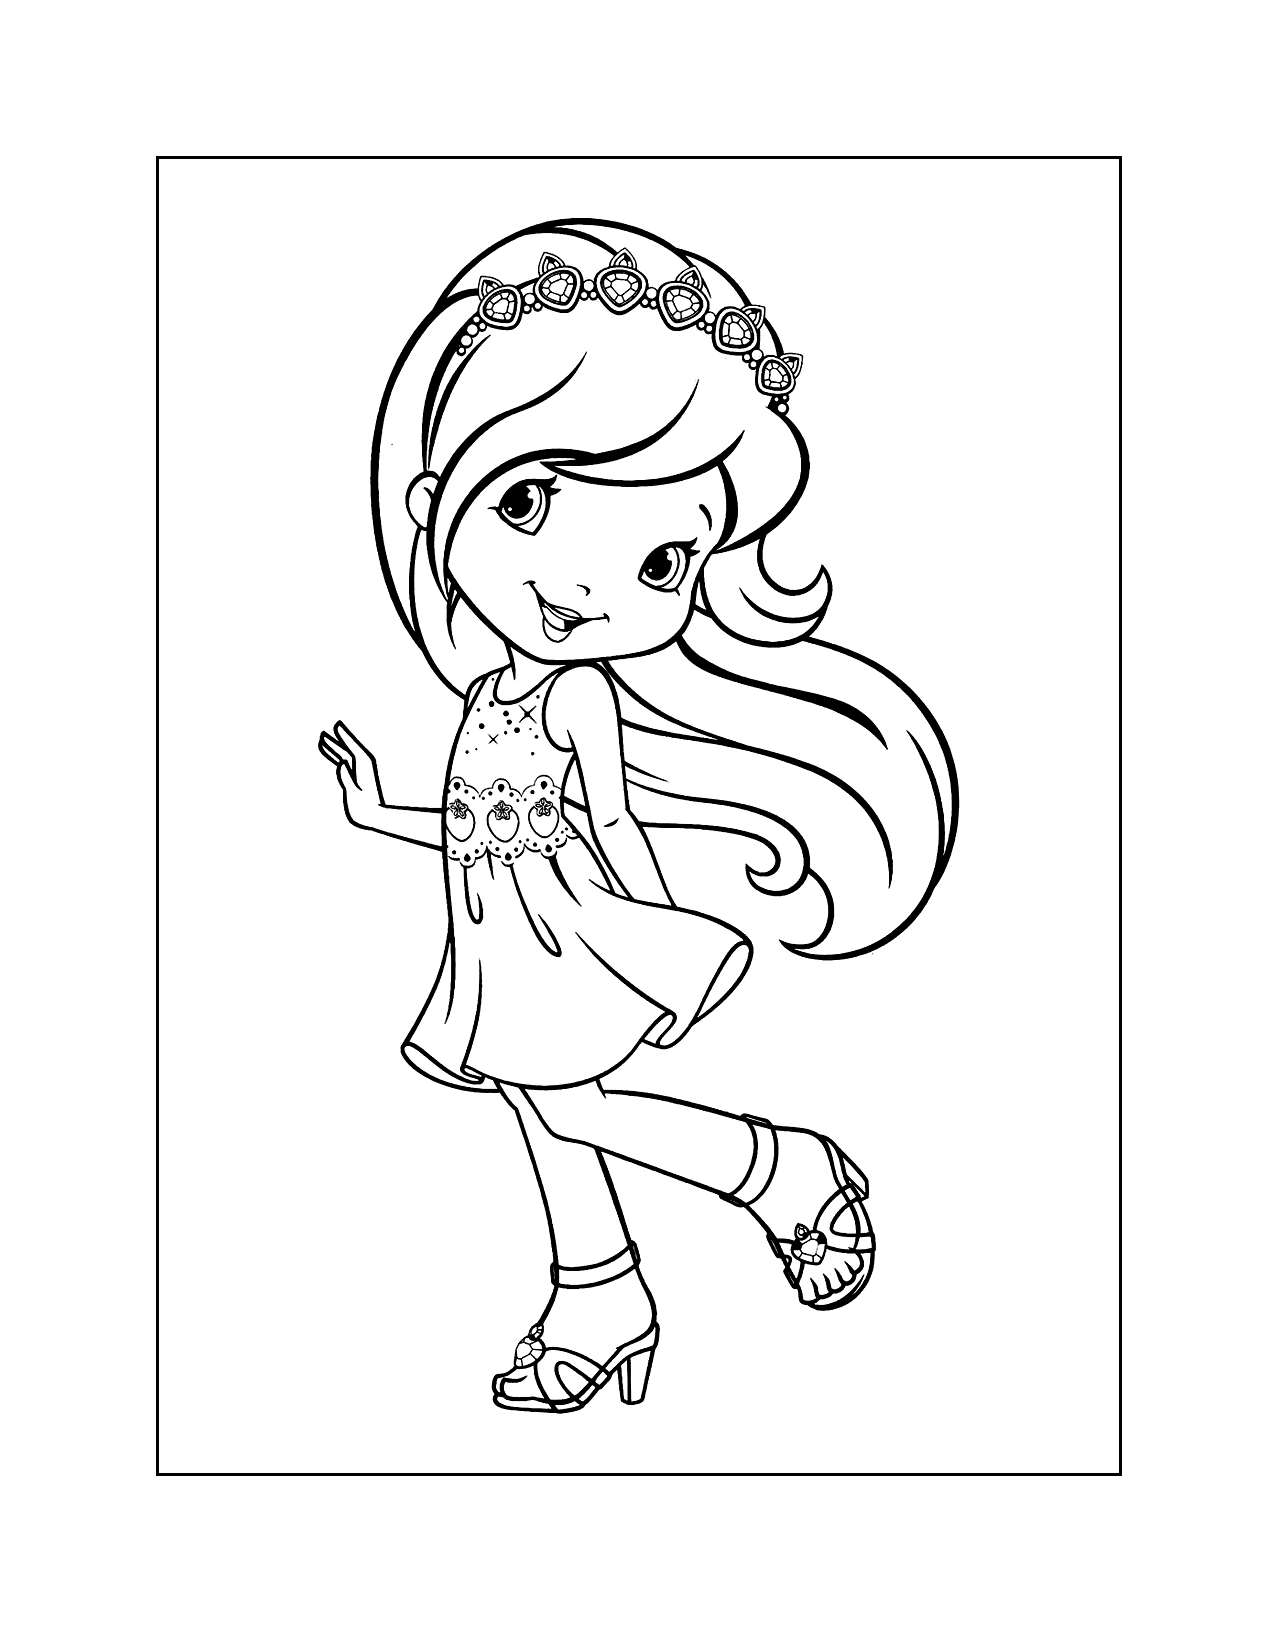 Strawberry Shortcake 2009 Character Coloring Page